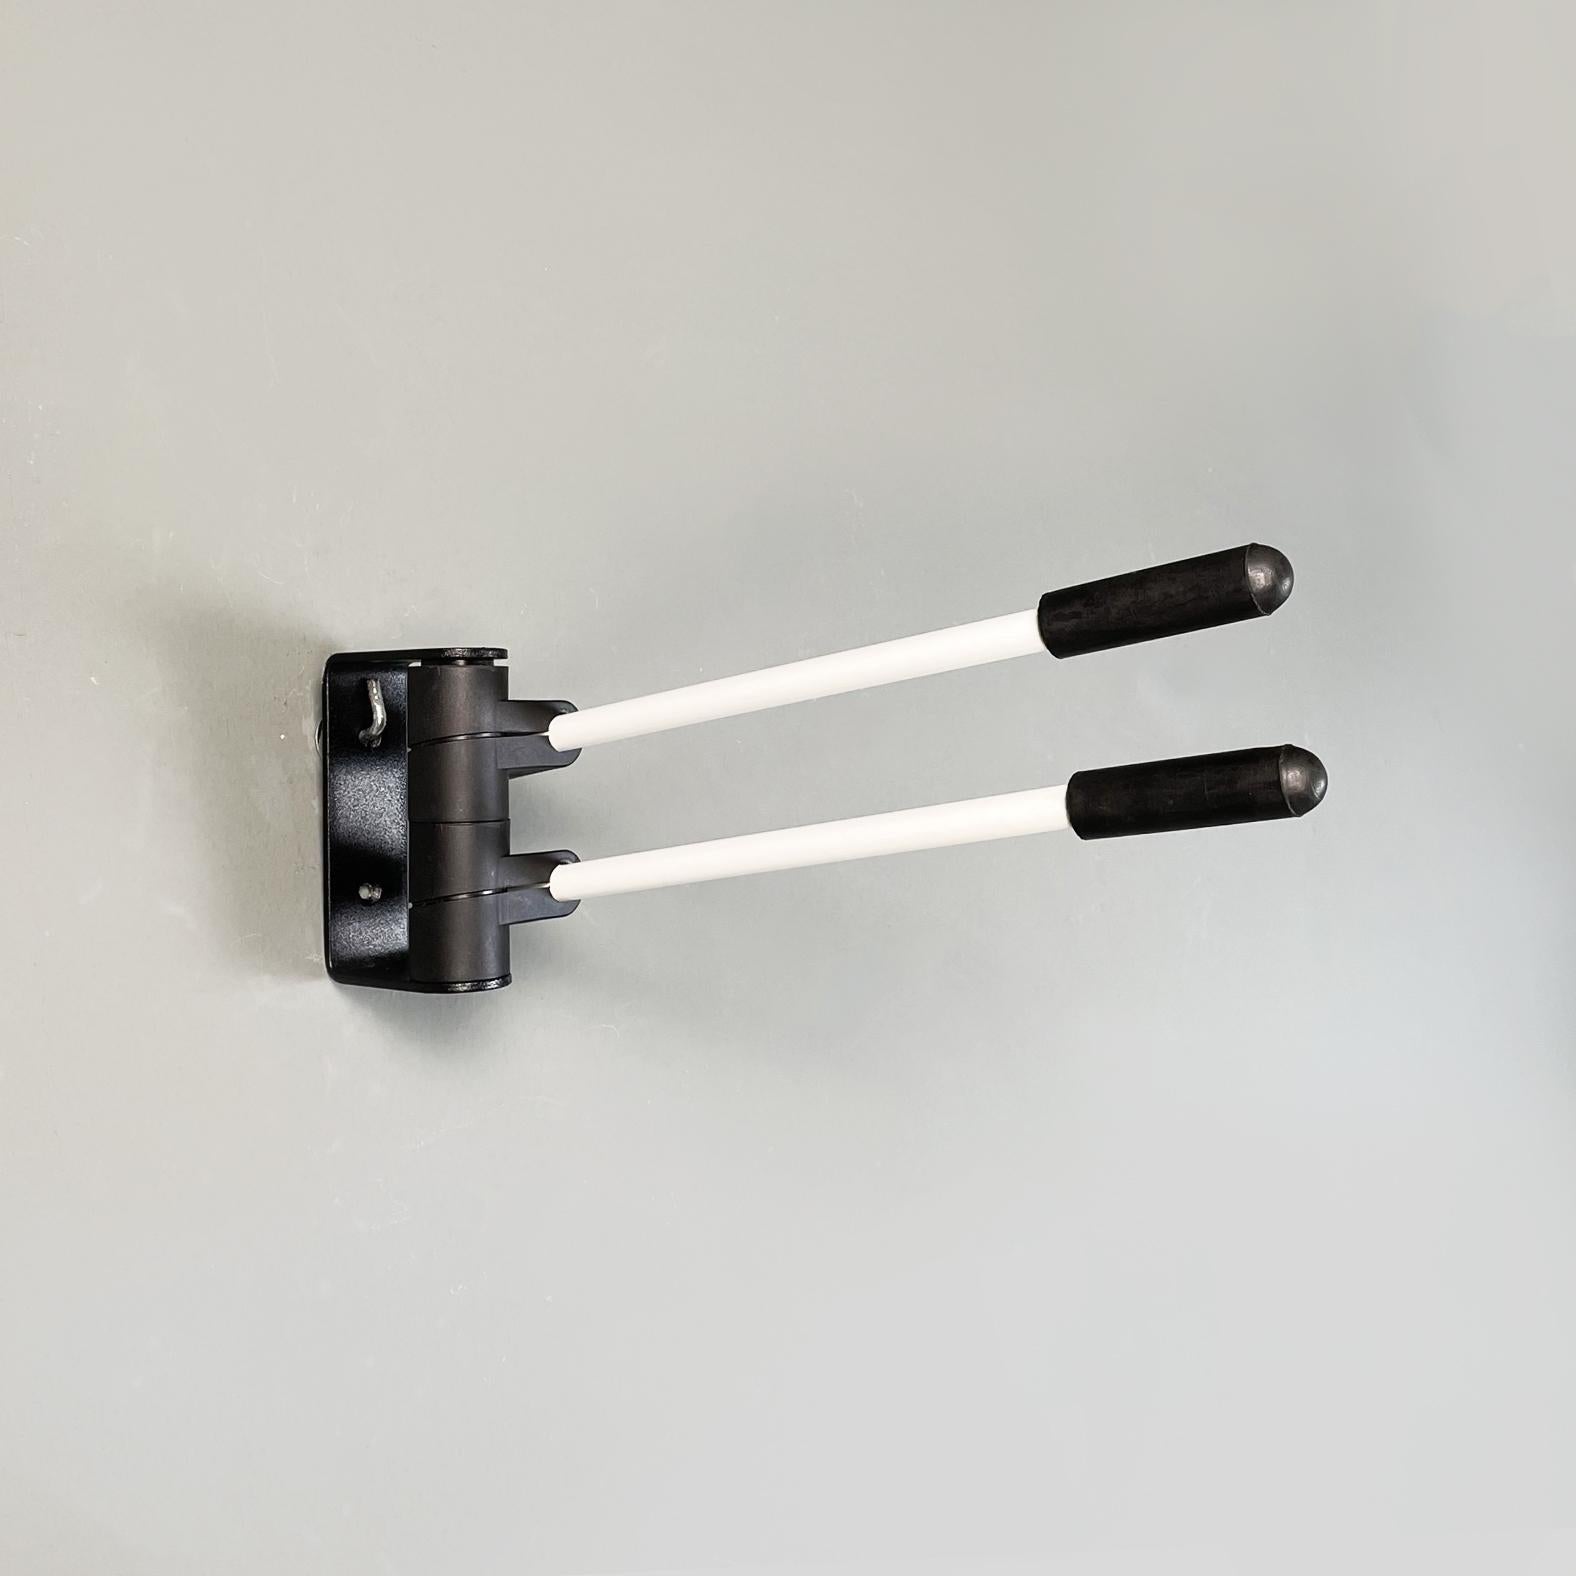 Italian modern Wall hanger Signa by De Pas, D'urbino and Lomazzi for Artemide, 1970s
Wall coat hanger mod. Signa made up of two movable arms in white painted tubular metal with black rubber tips. The base fixed to the wall is rectangular in black